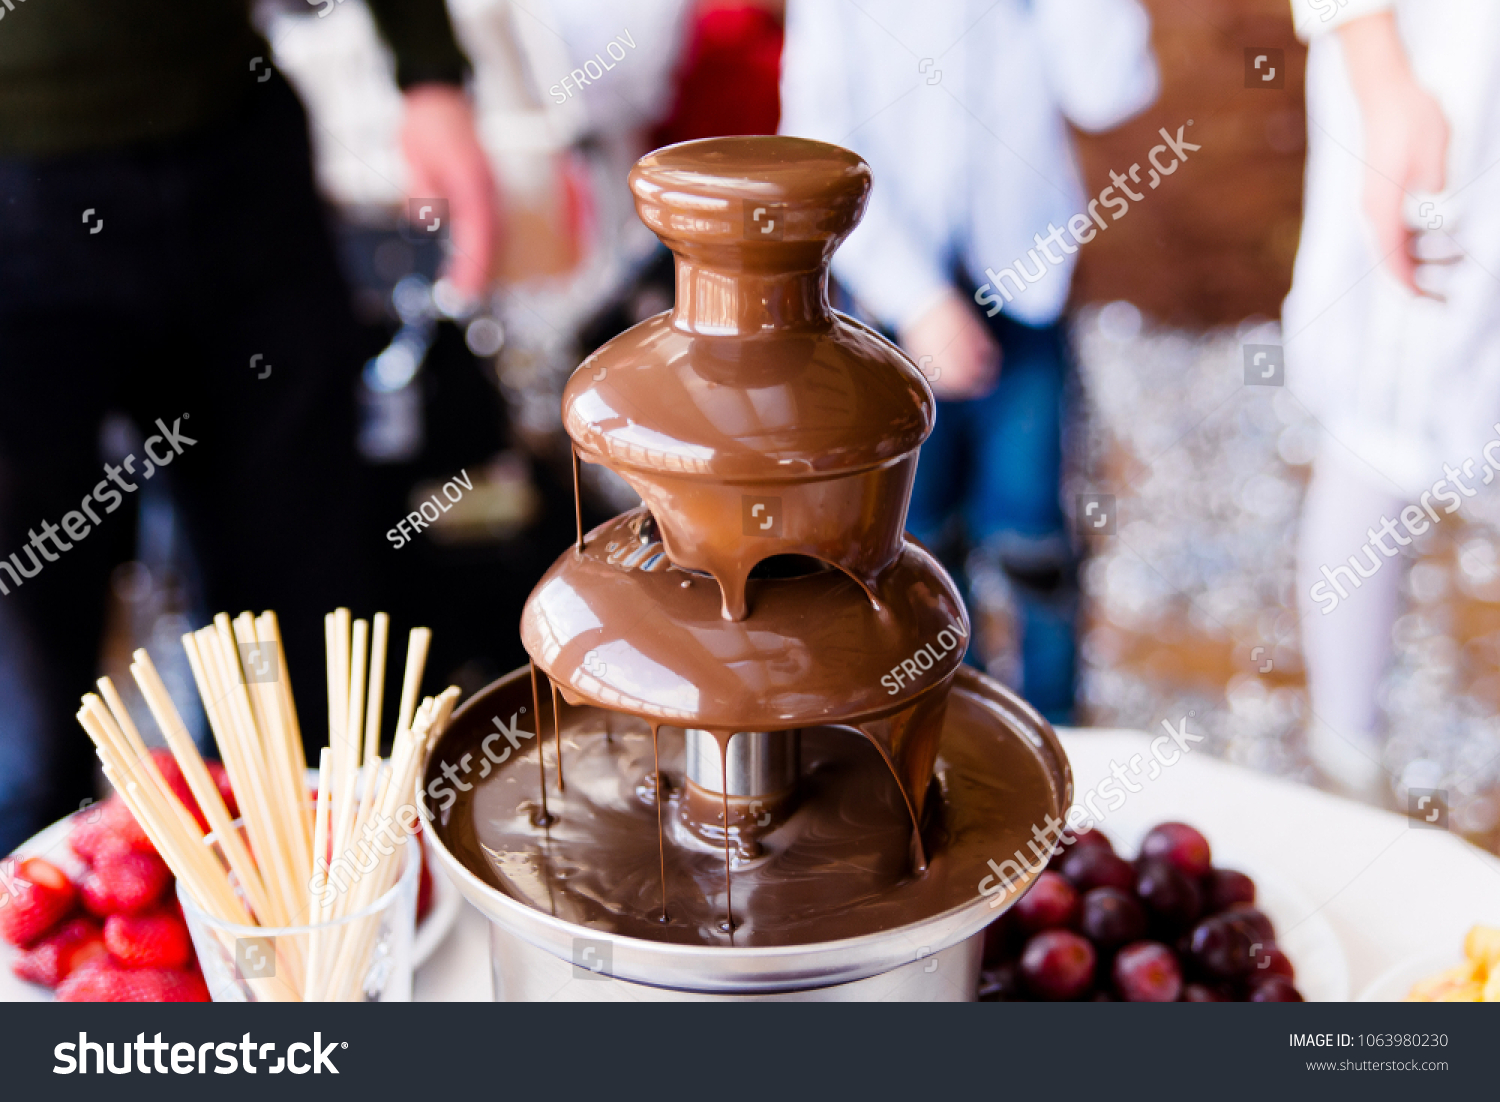 Vibrant Picture of Chocolate Fountain Fontain on childen kids birthday party with a kids playing around and marshmallows and fruits dip dipping into fountain #1063980230